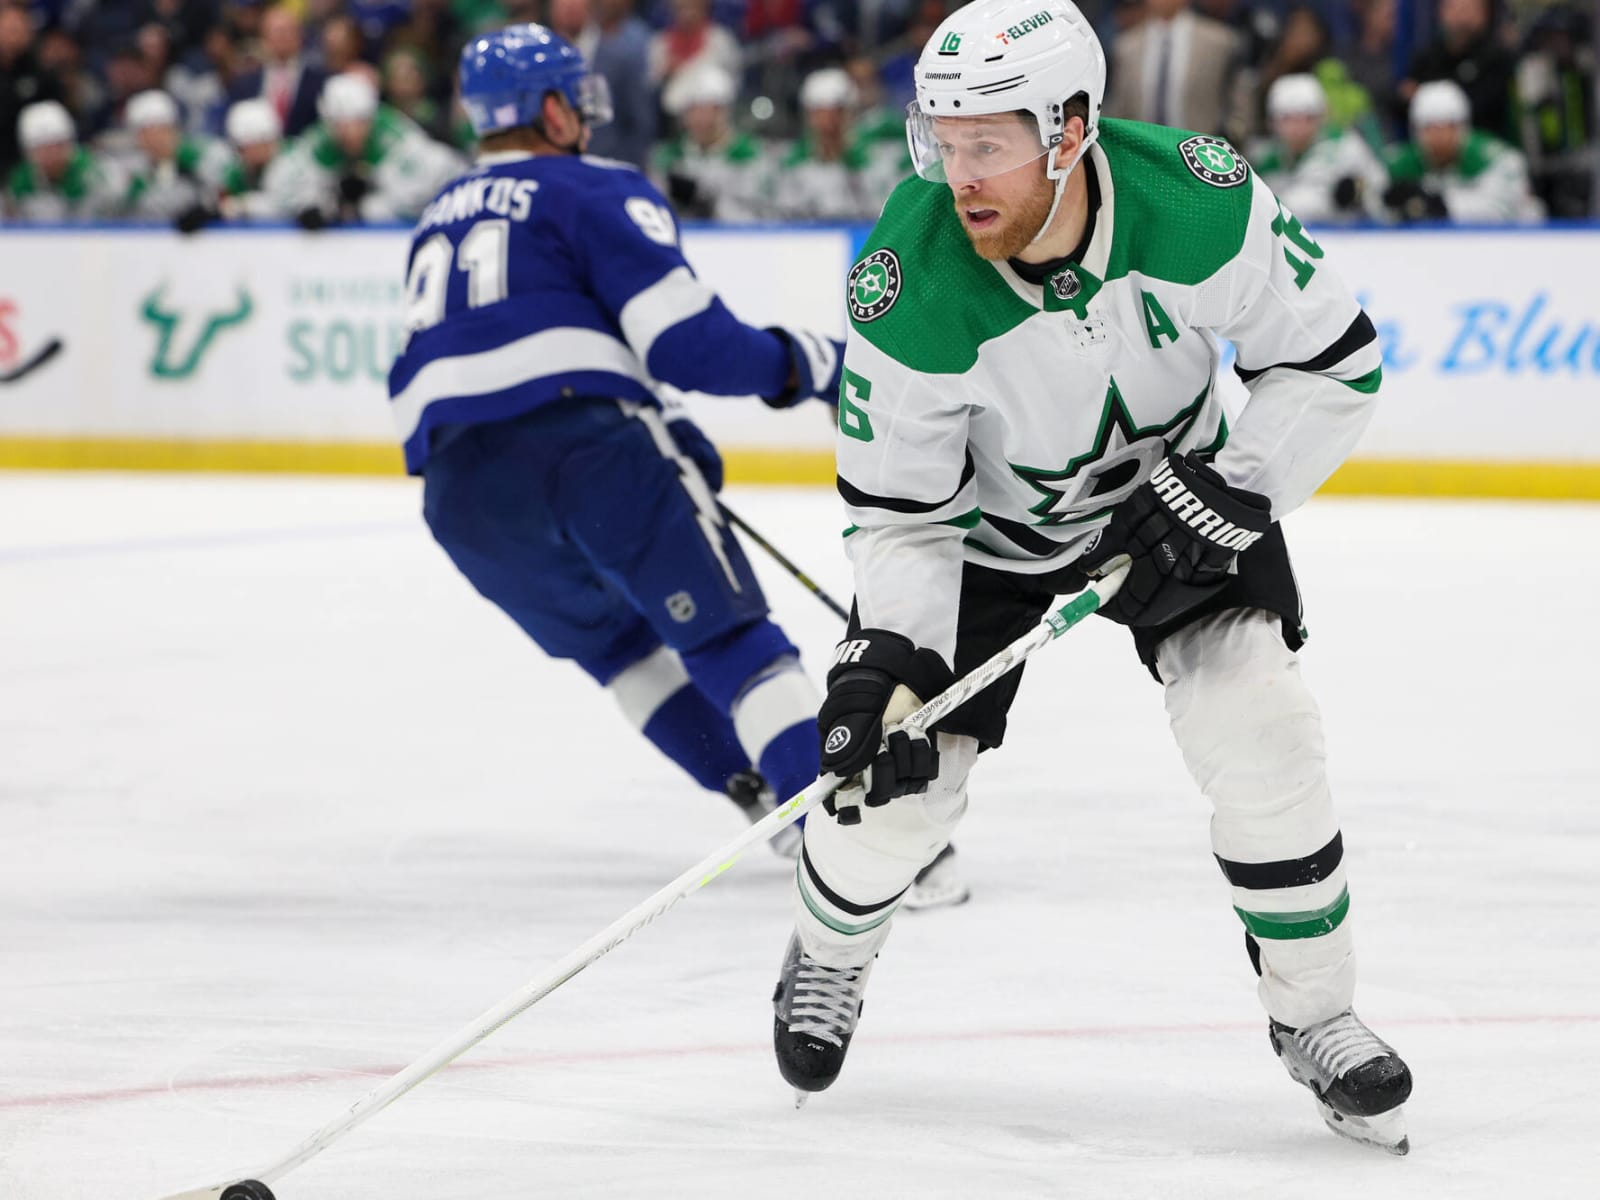 Dallas Stars round 2: Motivated by payback for hit on Pavelski